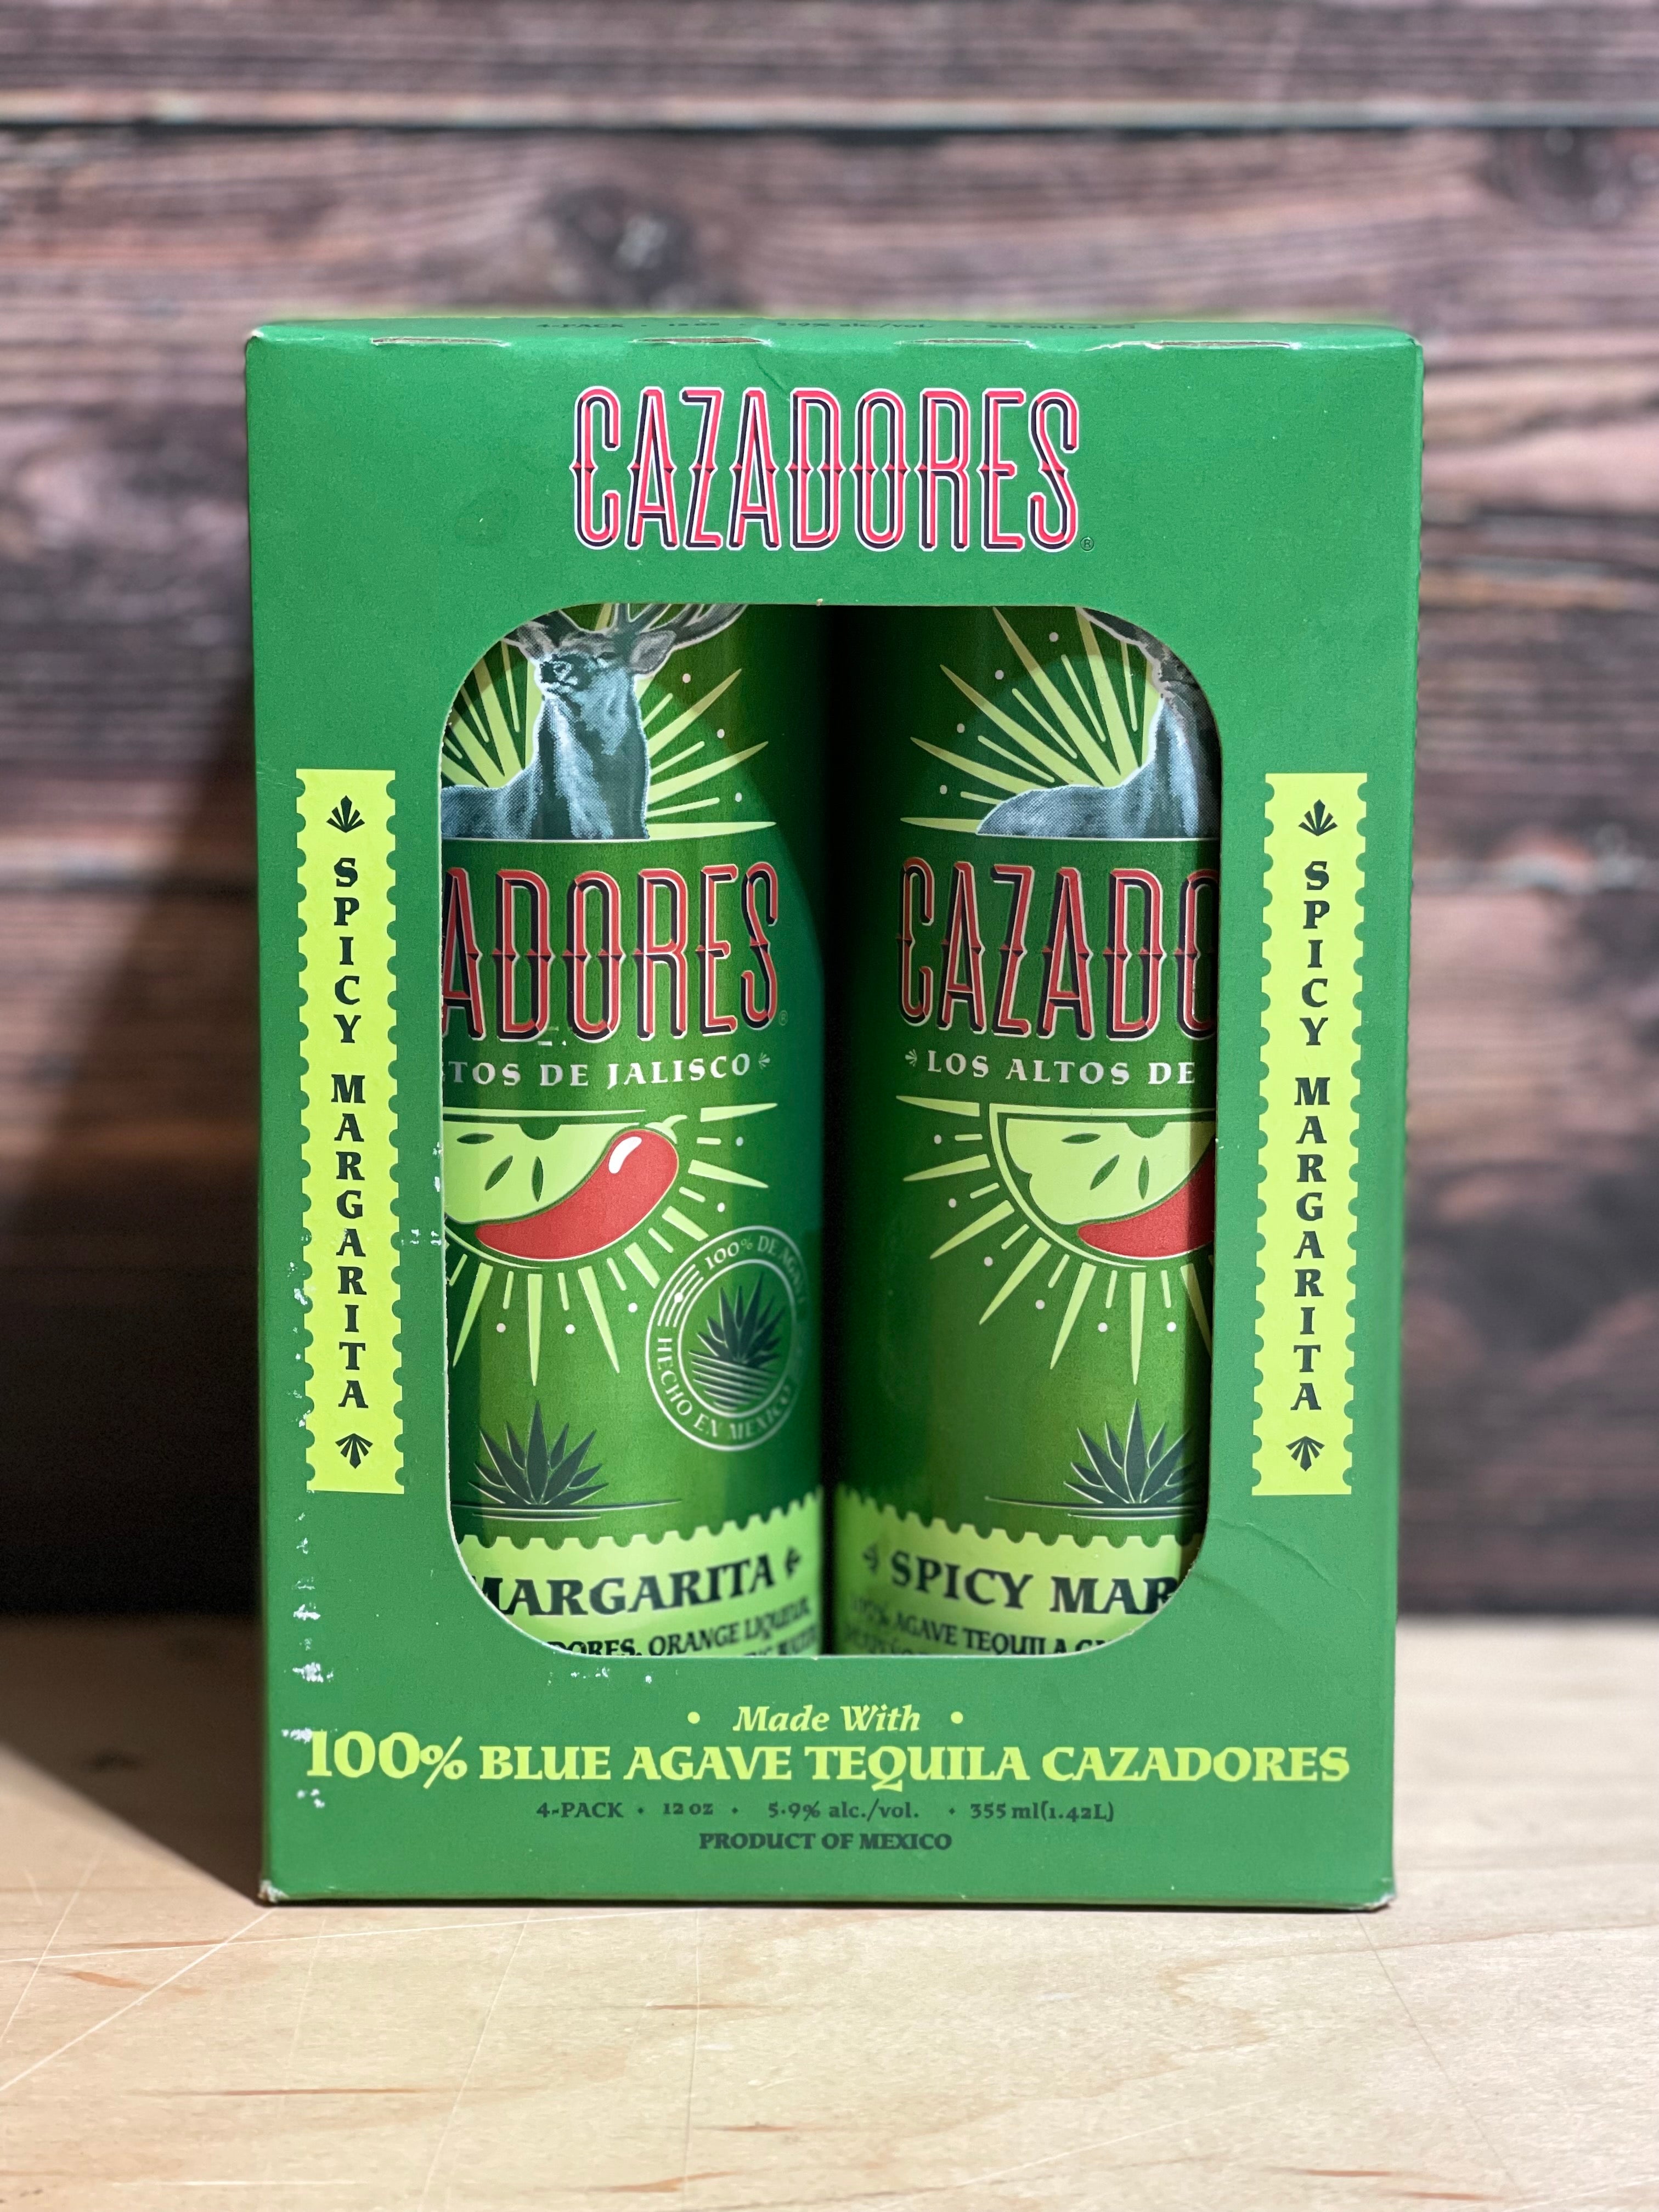 Cazadores Spicy Margarita Ready To Drink 4PK Cans (Made With Cazadores Tequila)